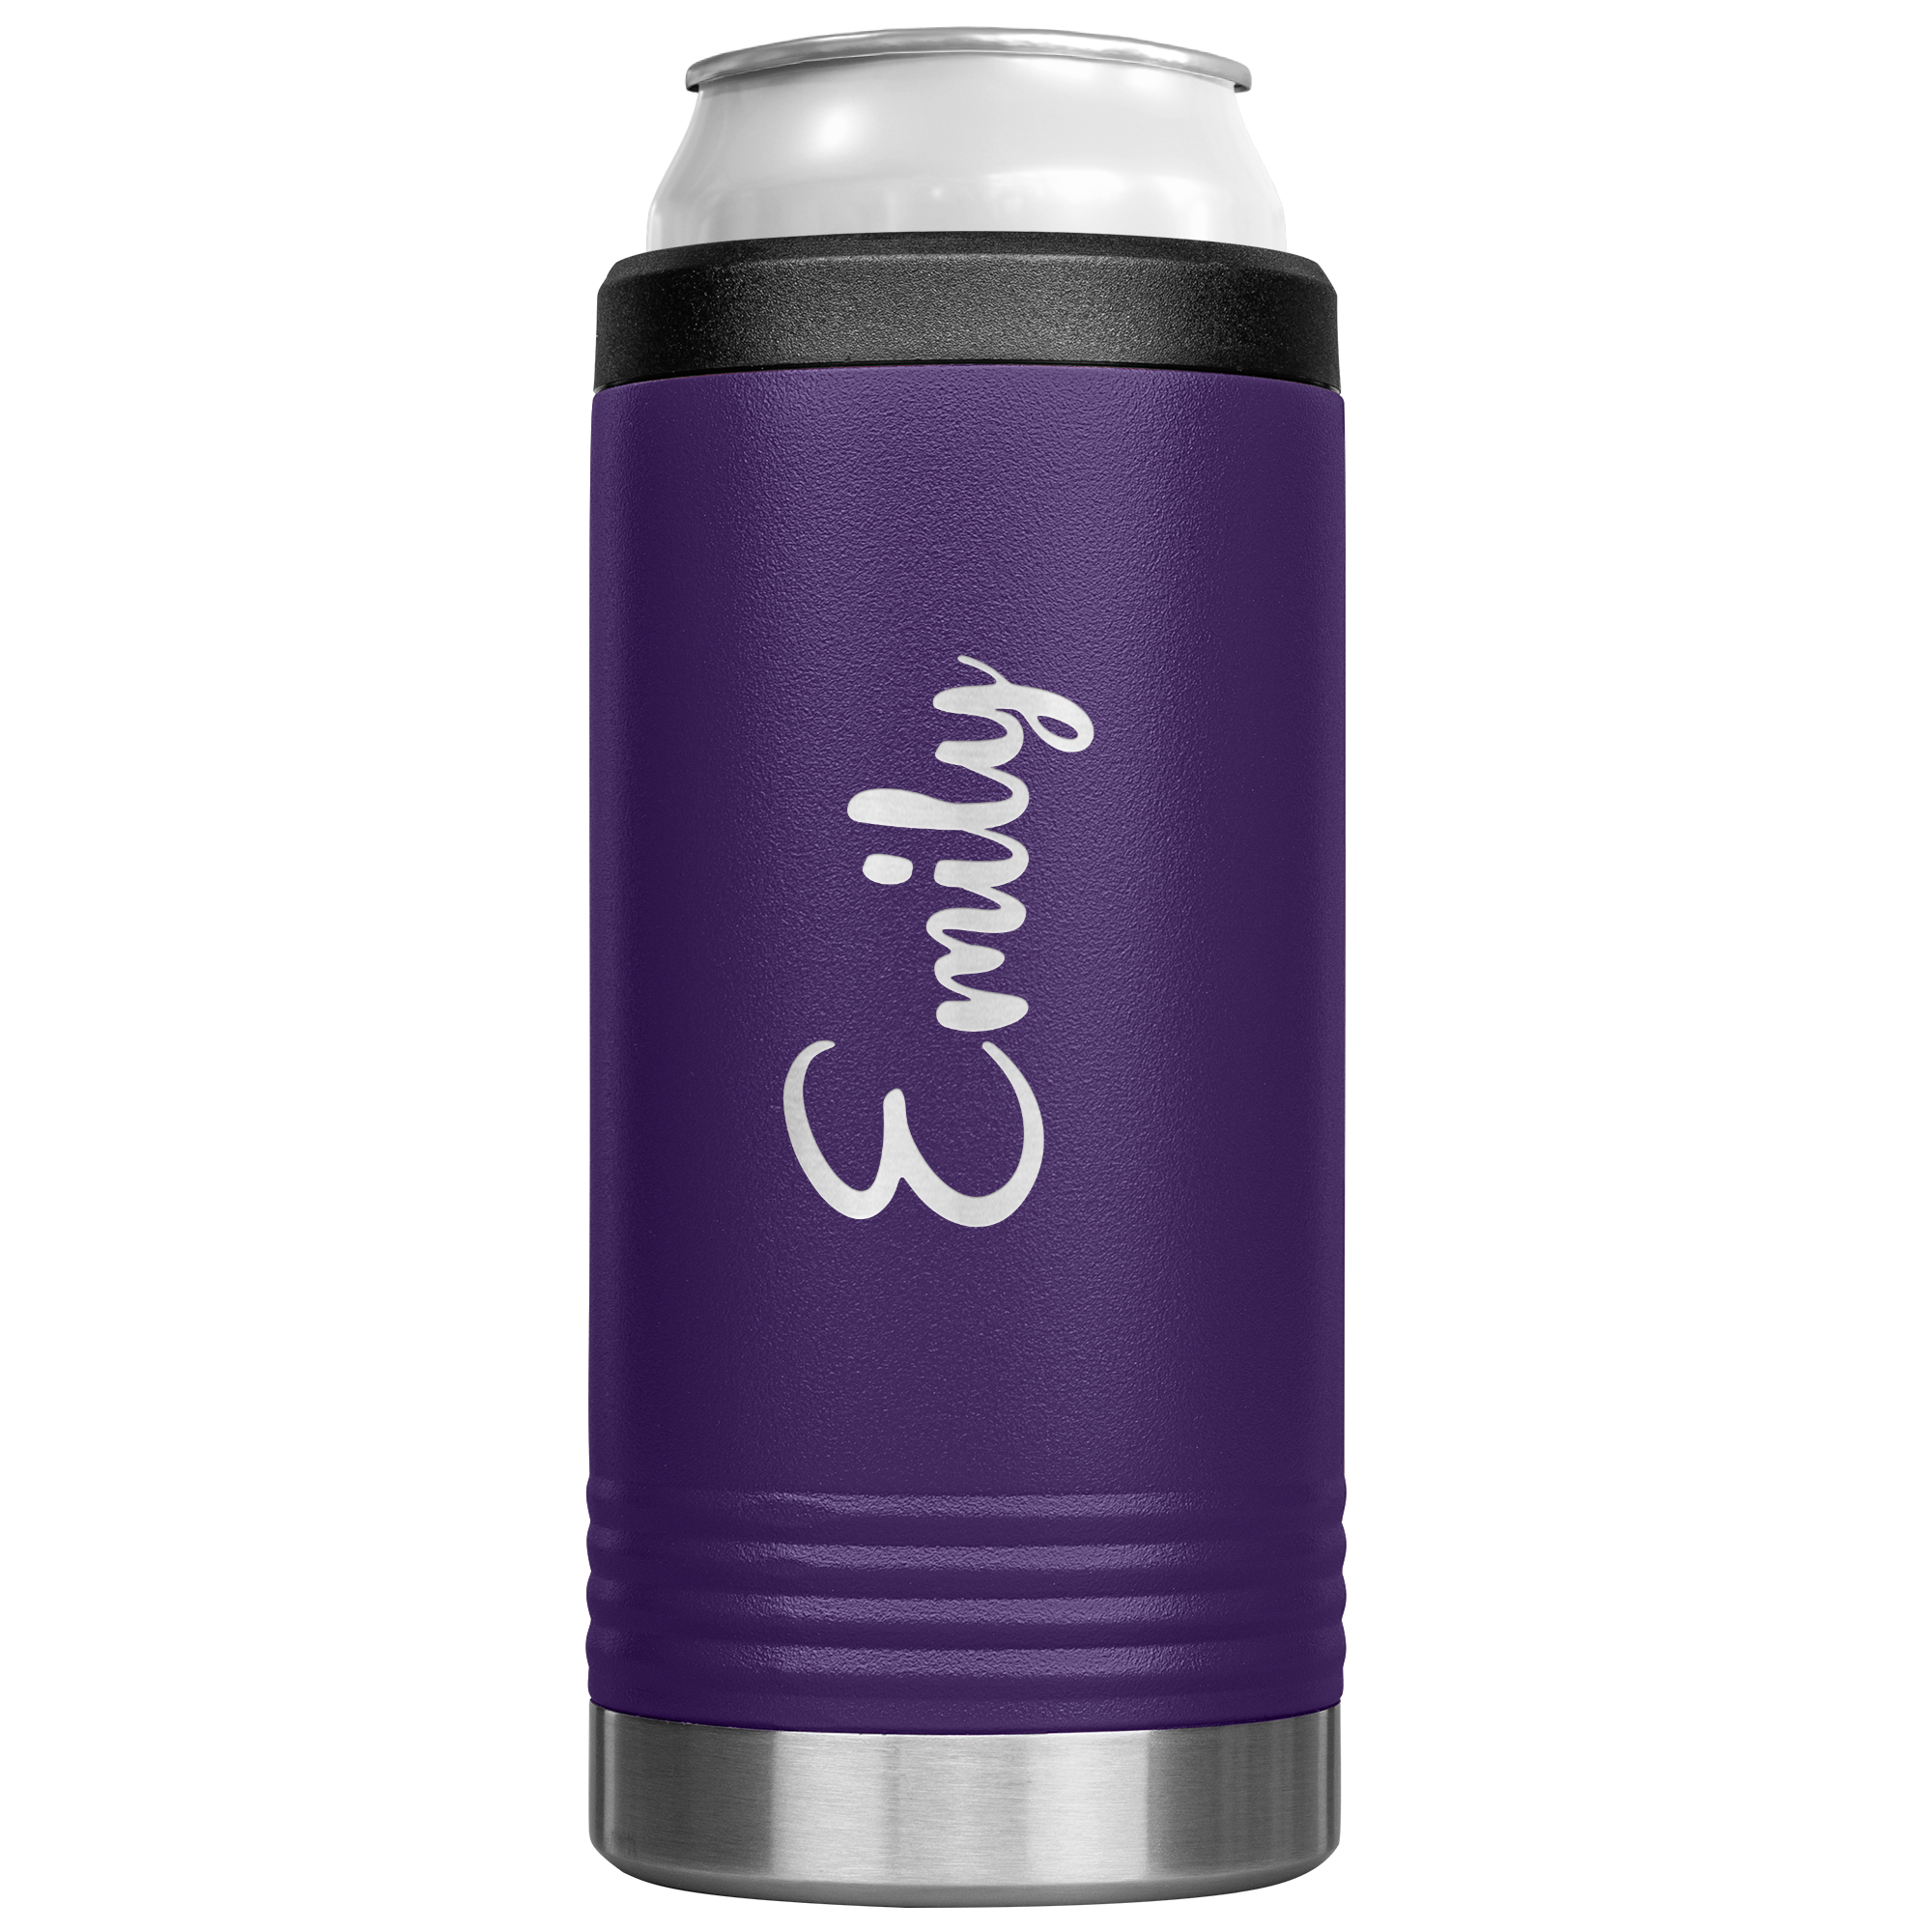 https://lantsagifts.com/wp-content/uploads/2022/10/Made-To-Teach-Personalized-Koozie-Purple-1.png